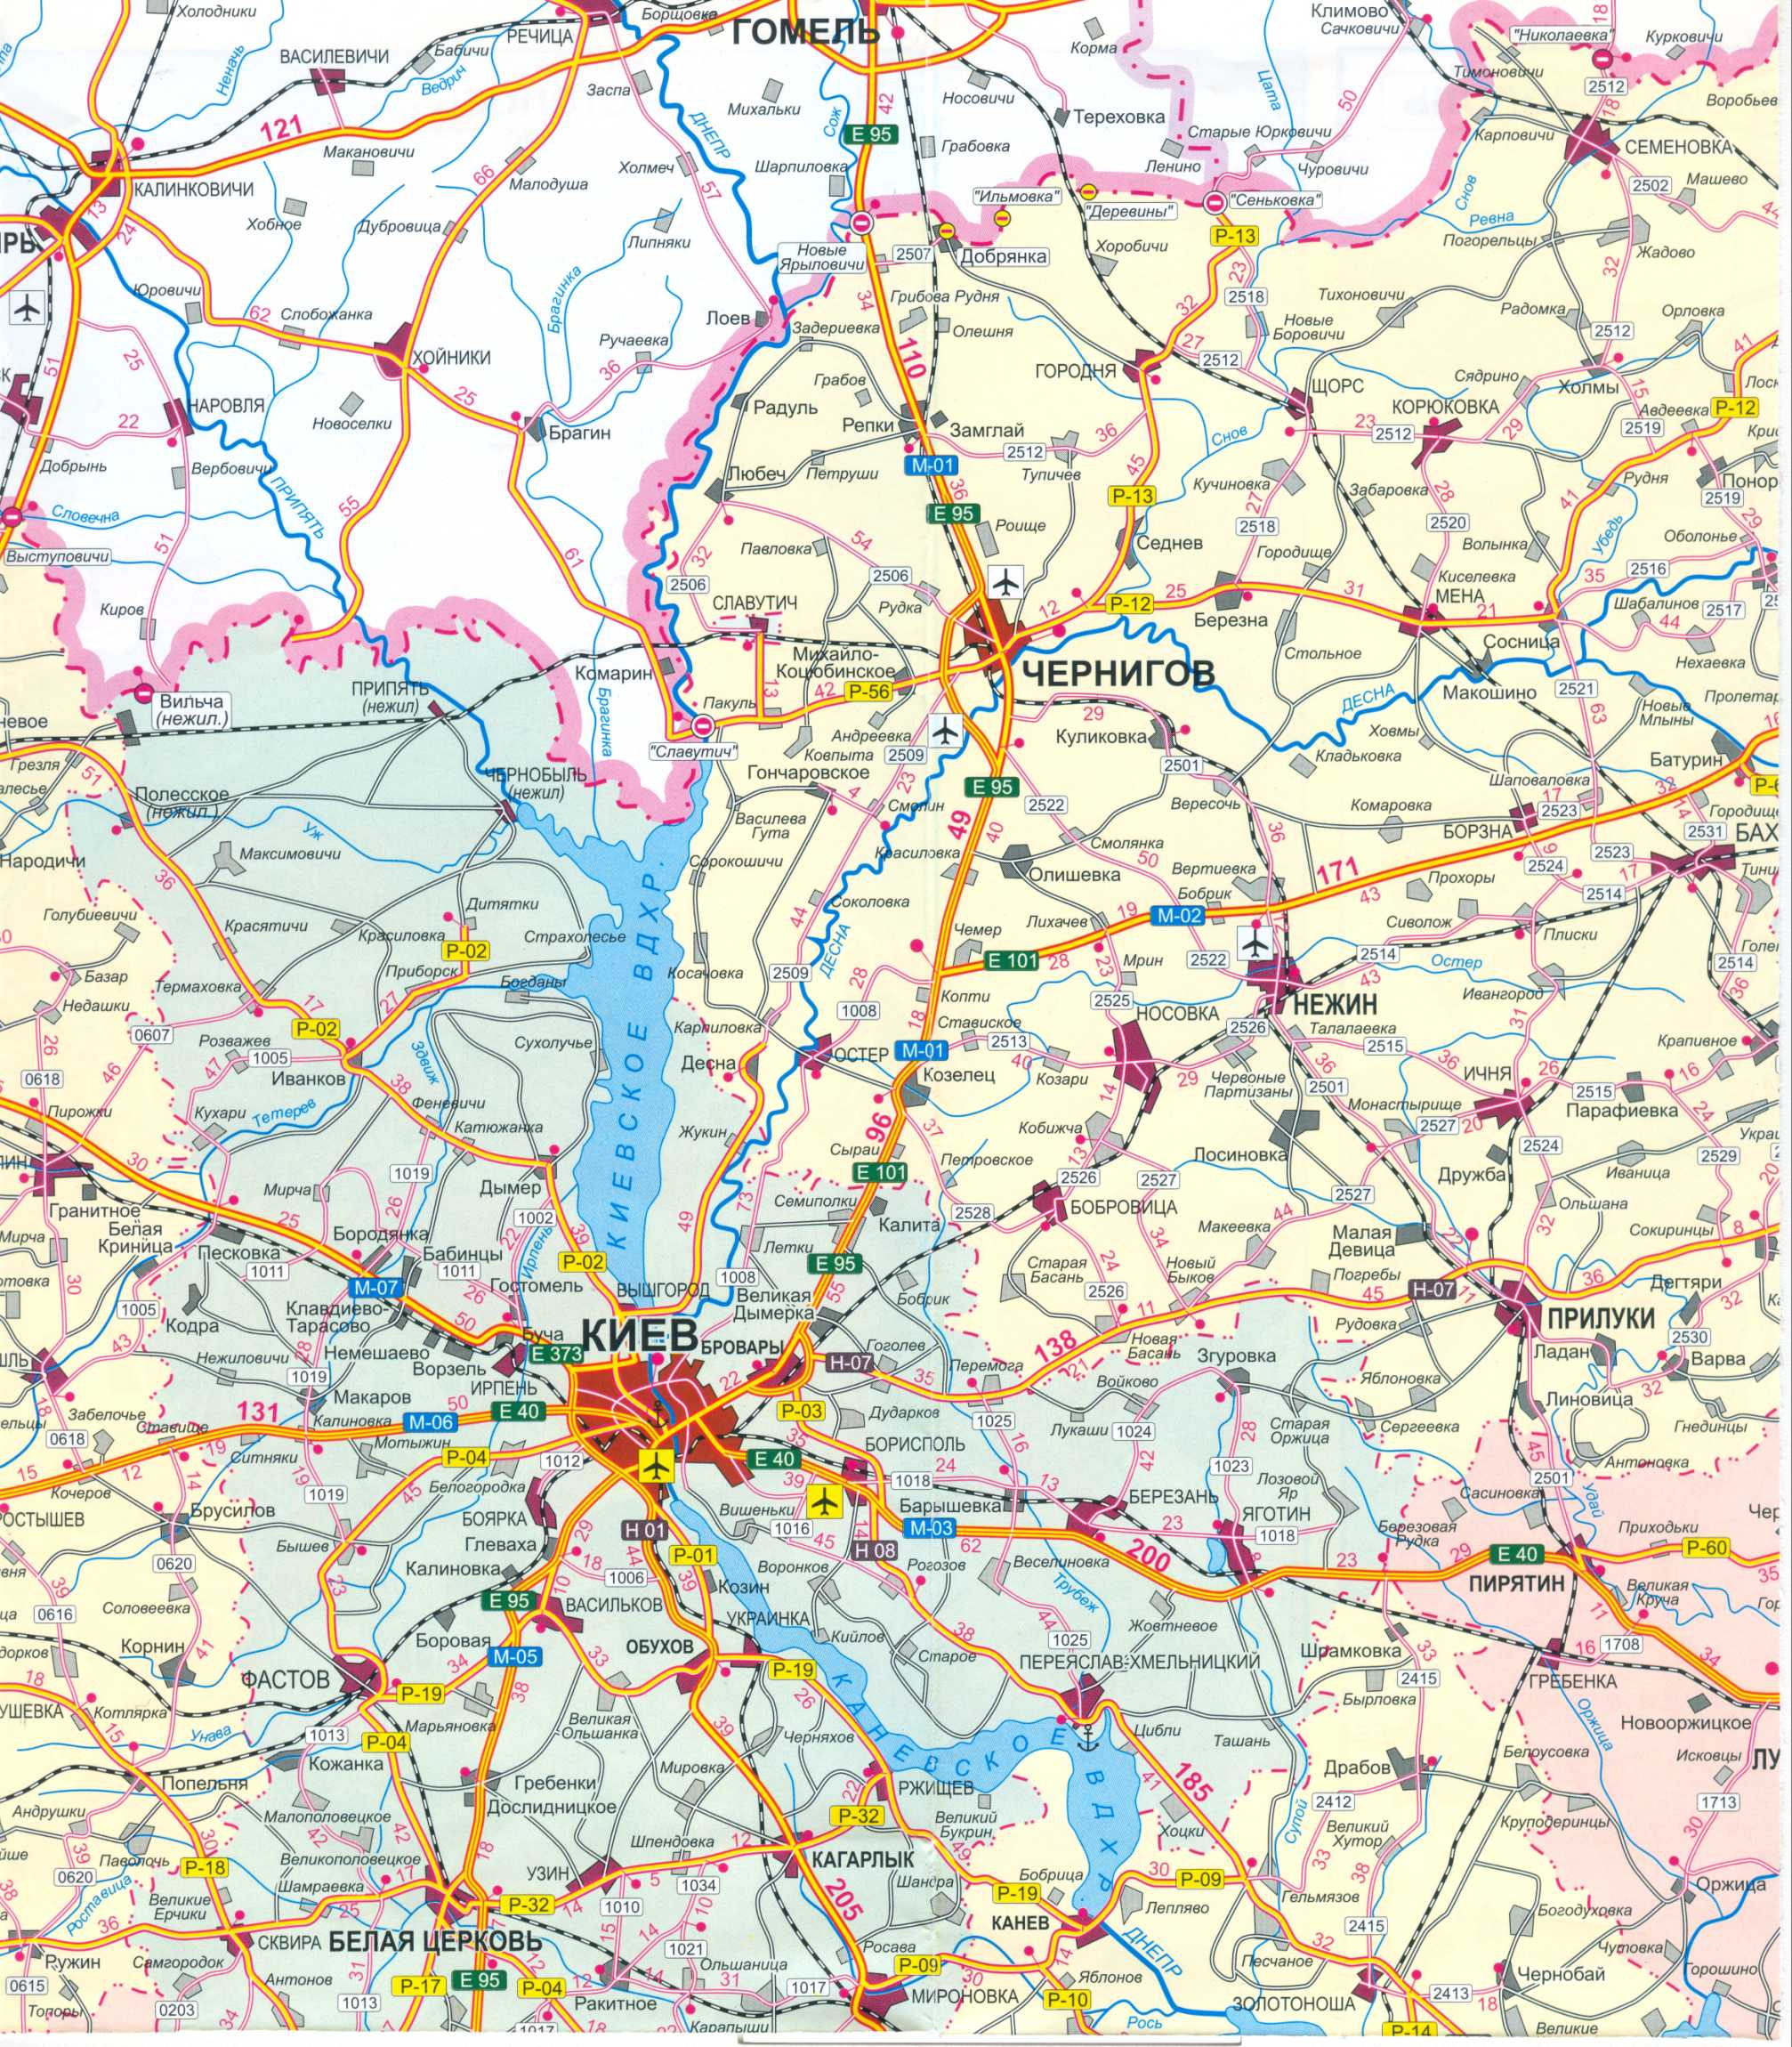 The map of Ukraine is free of charge. Map of roads of Ukraine free download. Large map of Ukraine's roads for free, C0